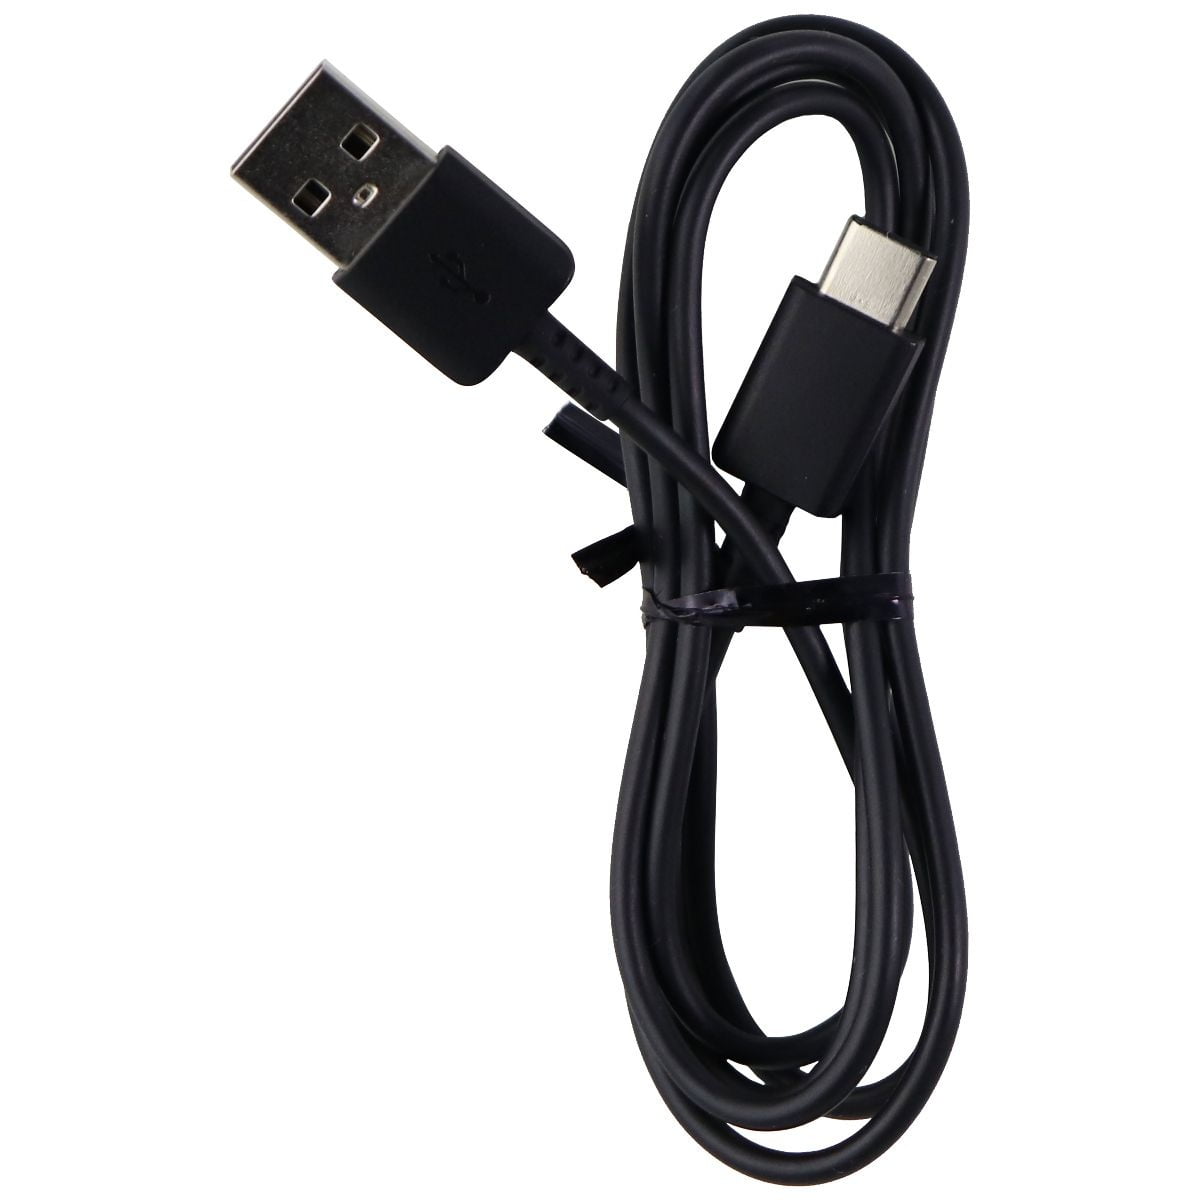 Samsung USB-A to USB-C Charging and Data Cable - Black (1 M, 3.3ft,  EP-DT725BBZ) (Used)